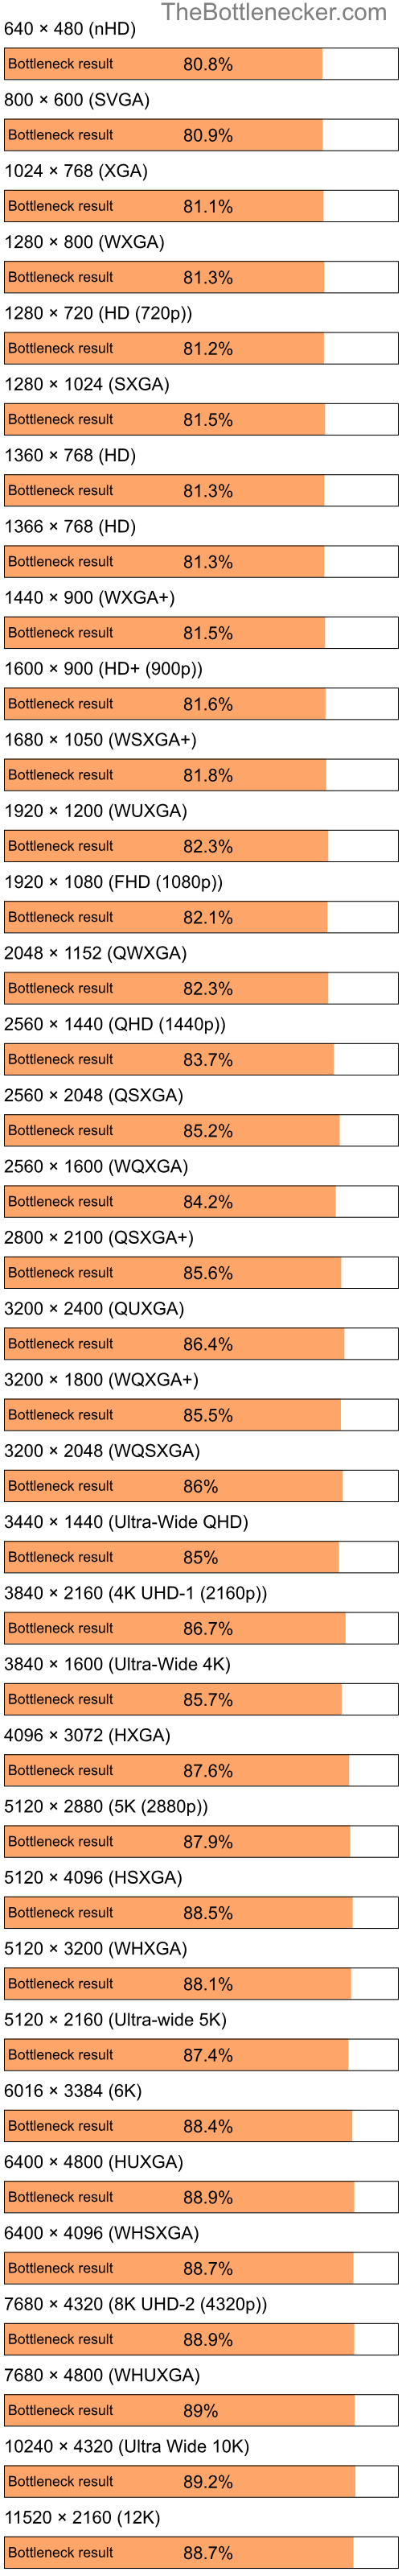 Bottleneck results by resolution for Intel Pentium 4 and NVIDIA GeForce FX 5600 in Processor Intense Tasks